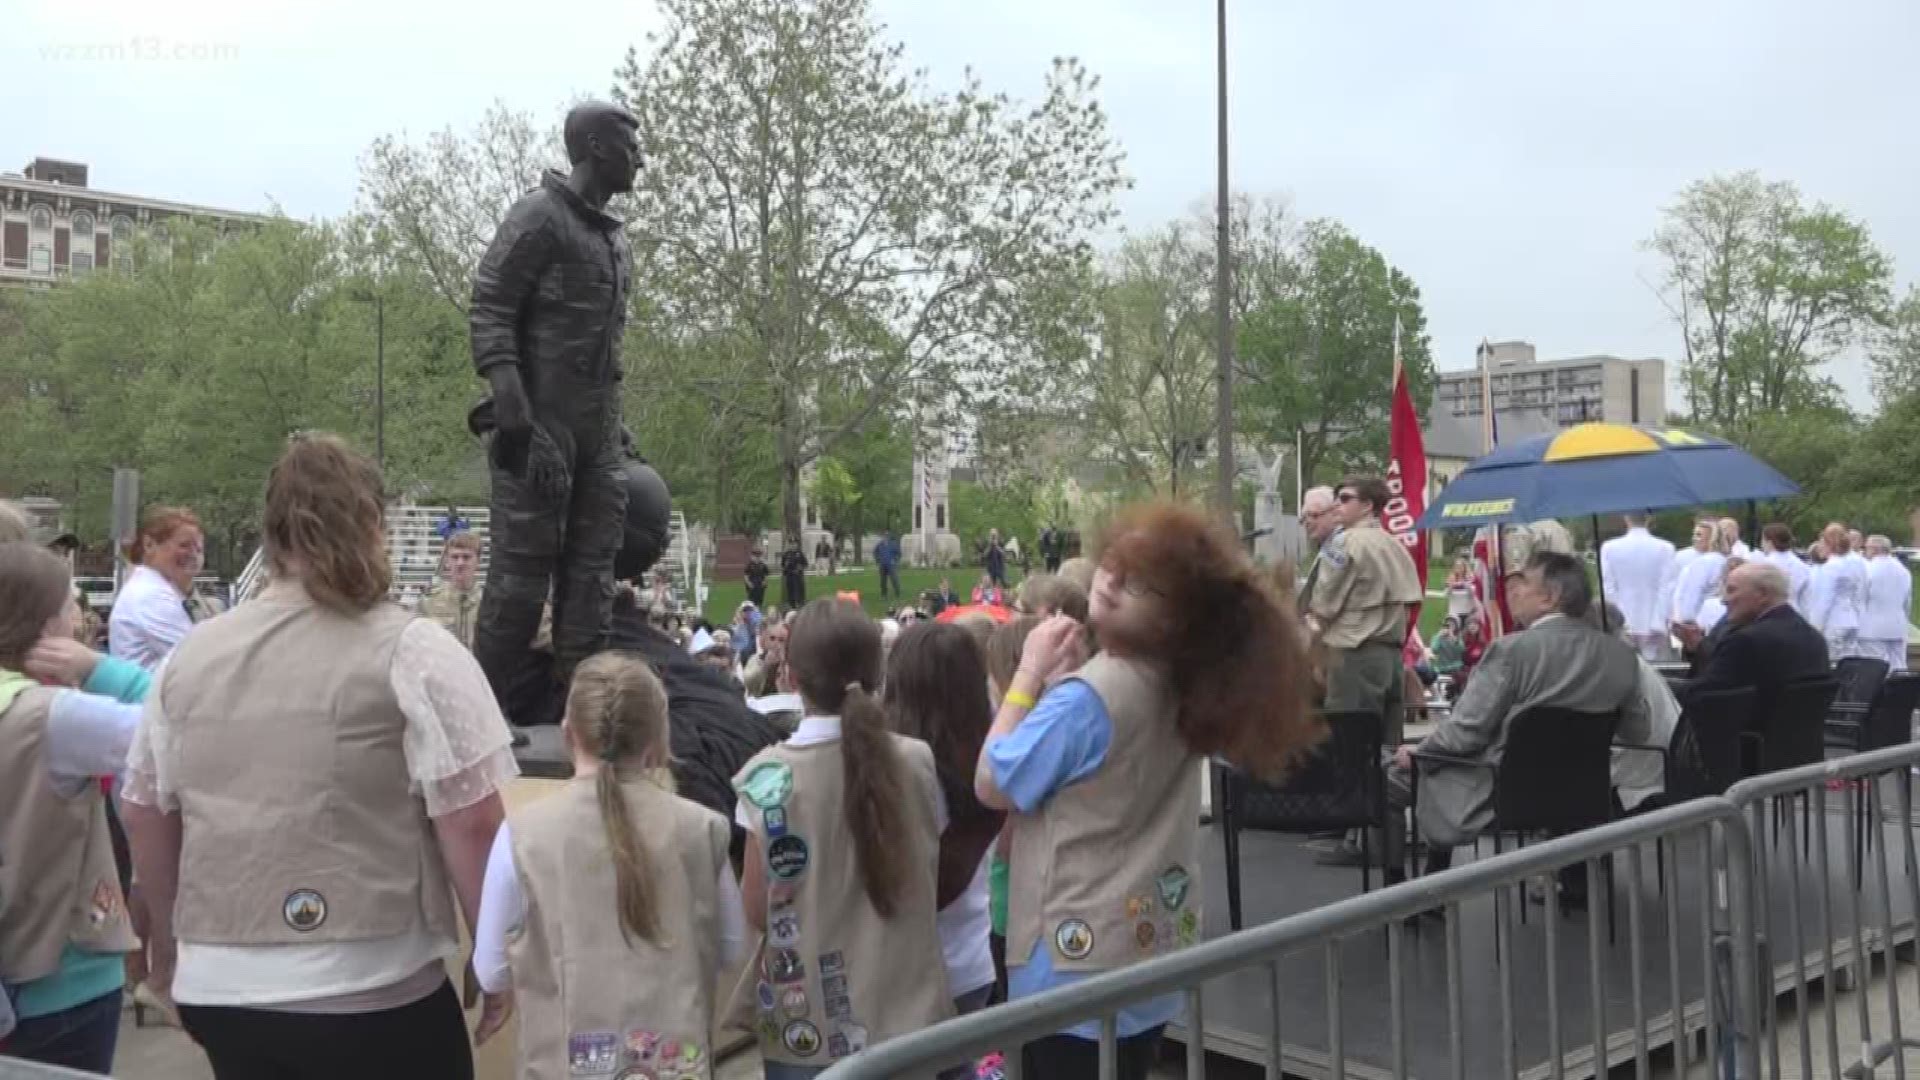 Roger B Chaffee statue unveiled in downtown Grand Rapids